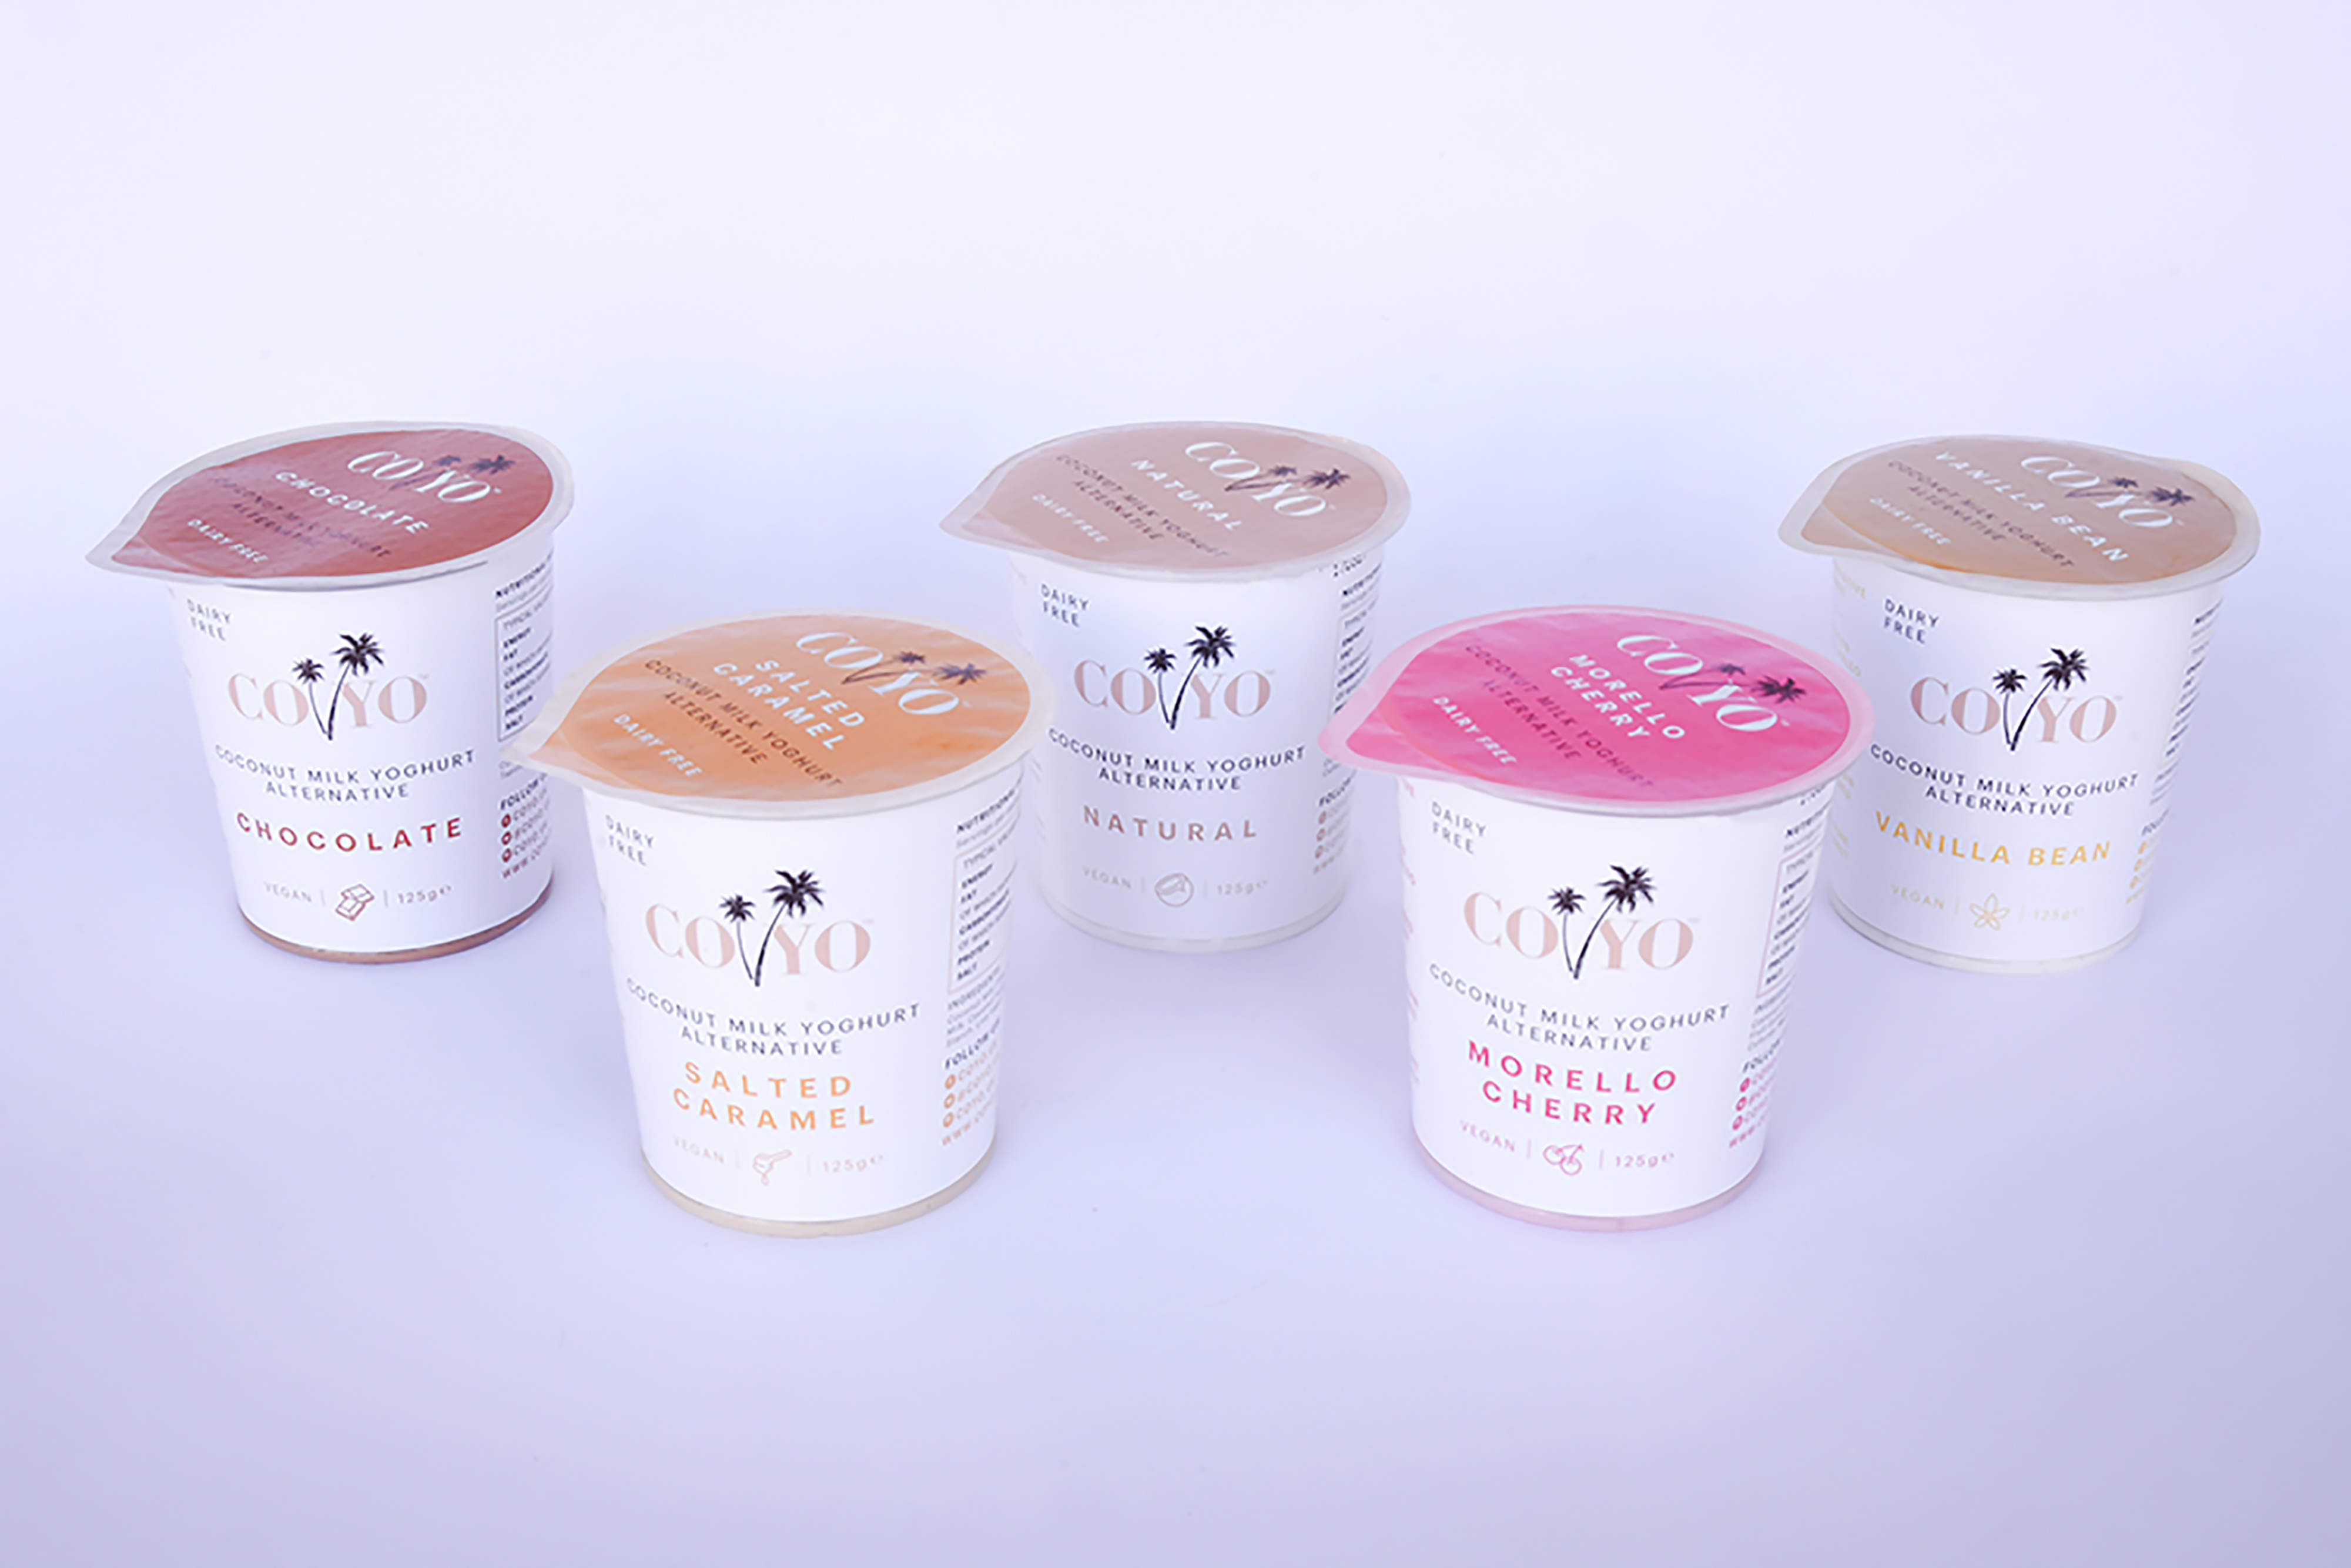 CO YO LAUNCHES NEW PACKAGING TO REFLECT THE BRAND’S ALL-NATURAL INGREDIENTS